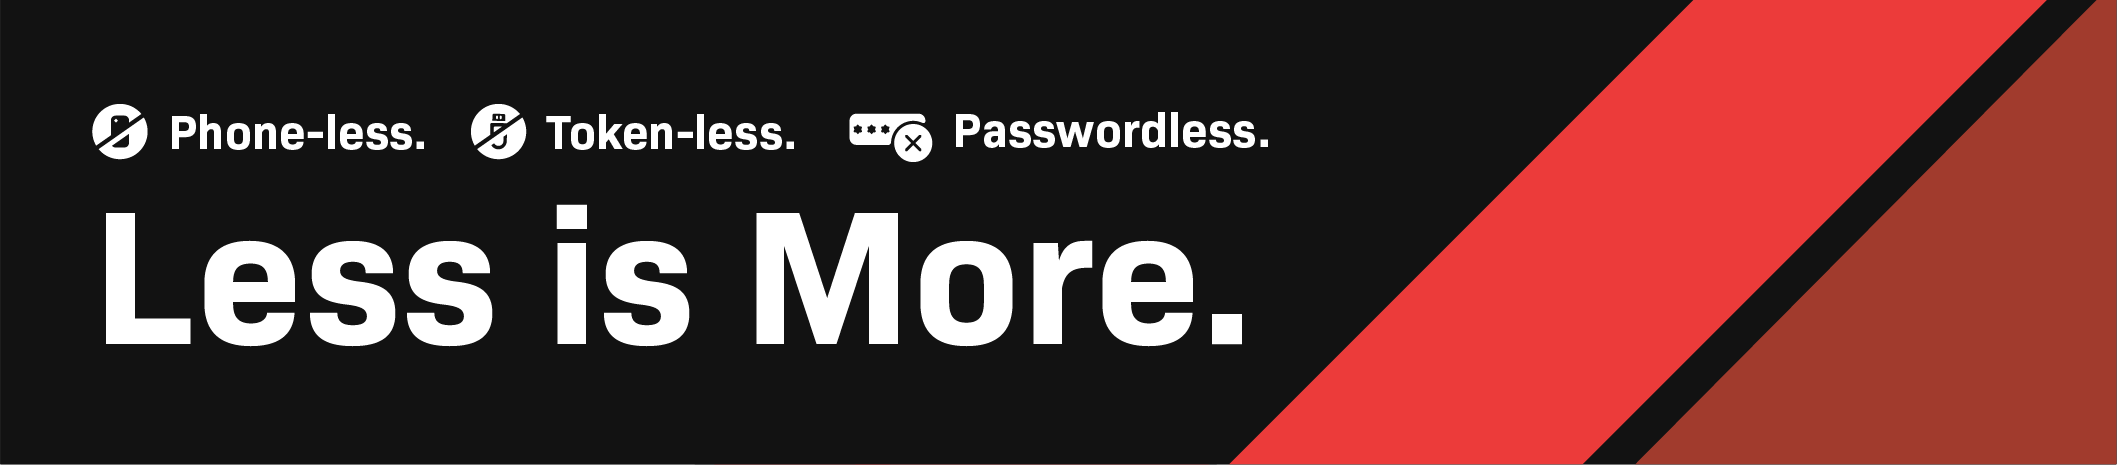 Phone-less. Token-less. Passwordless. Less is more.